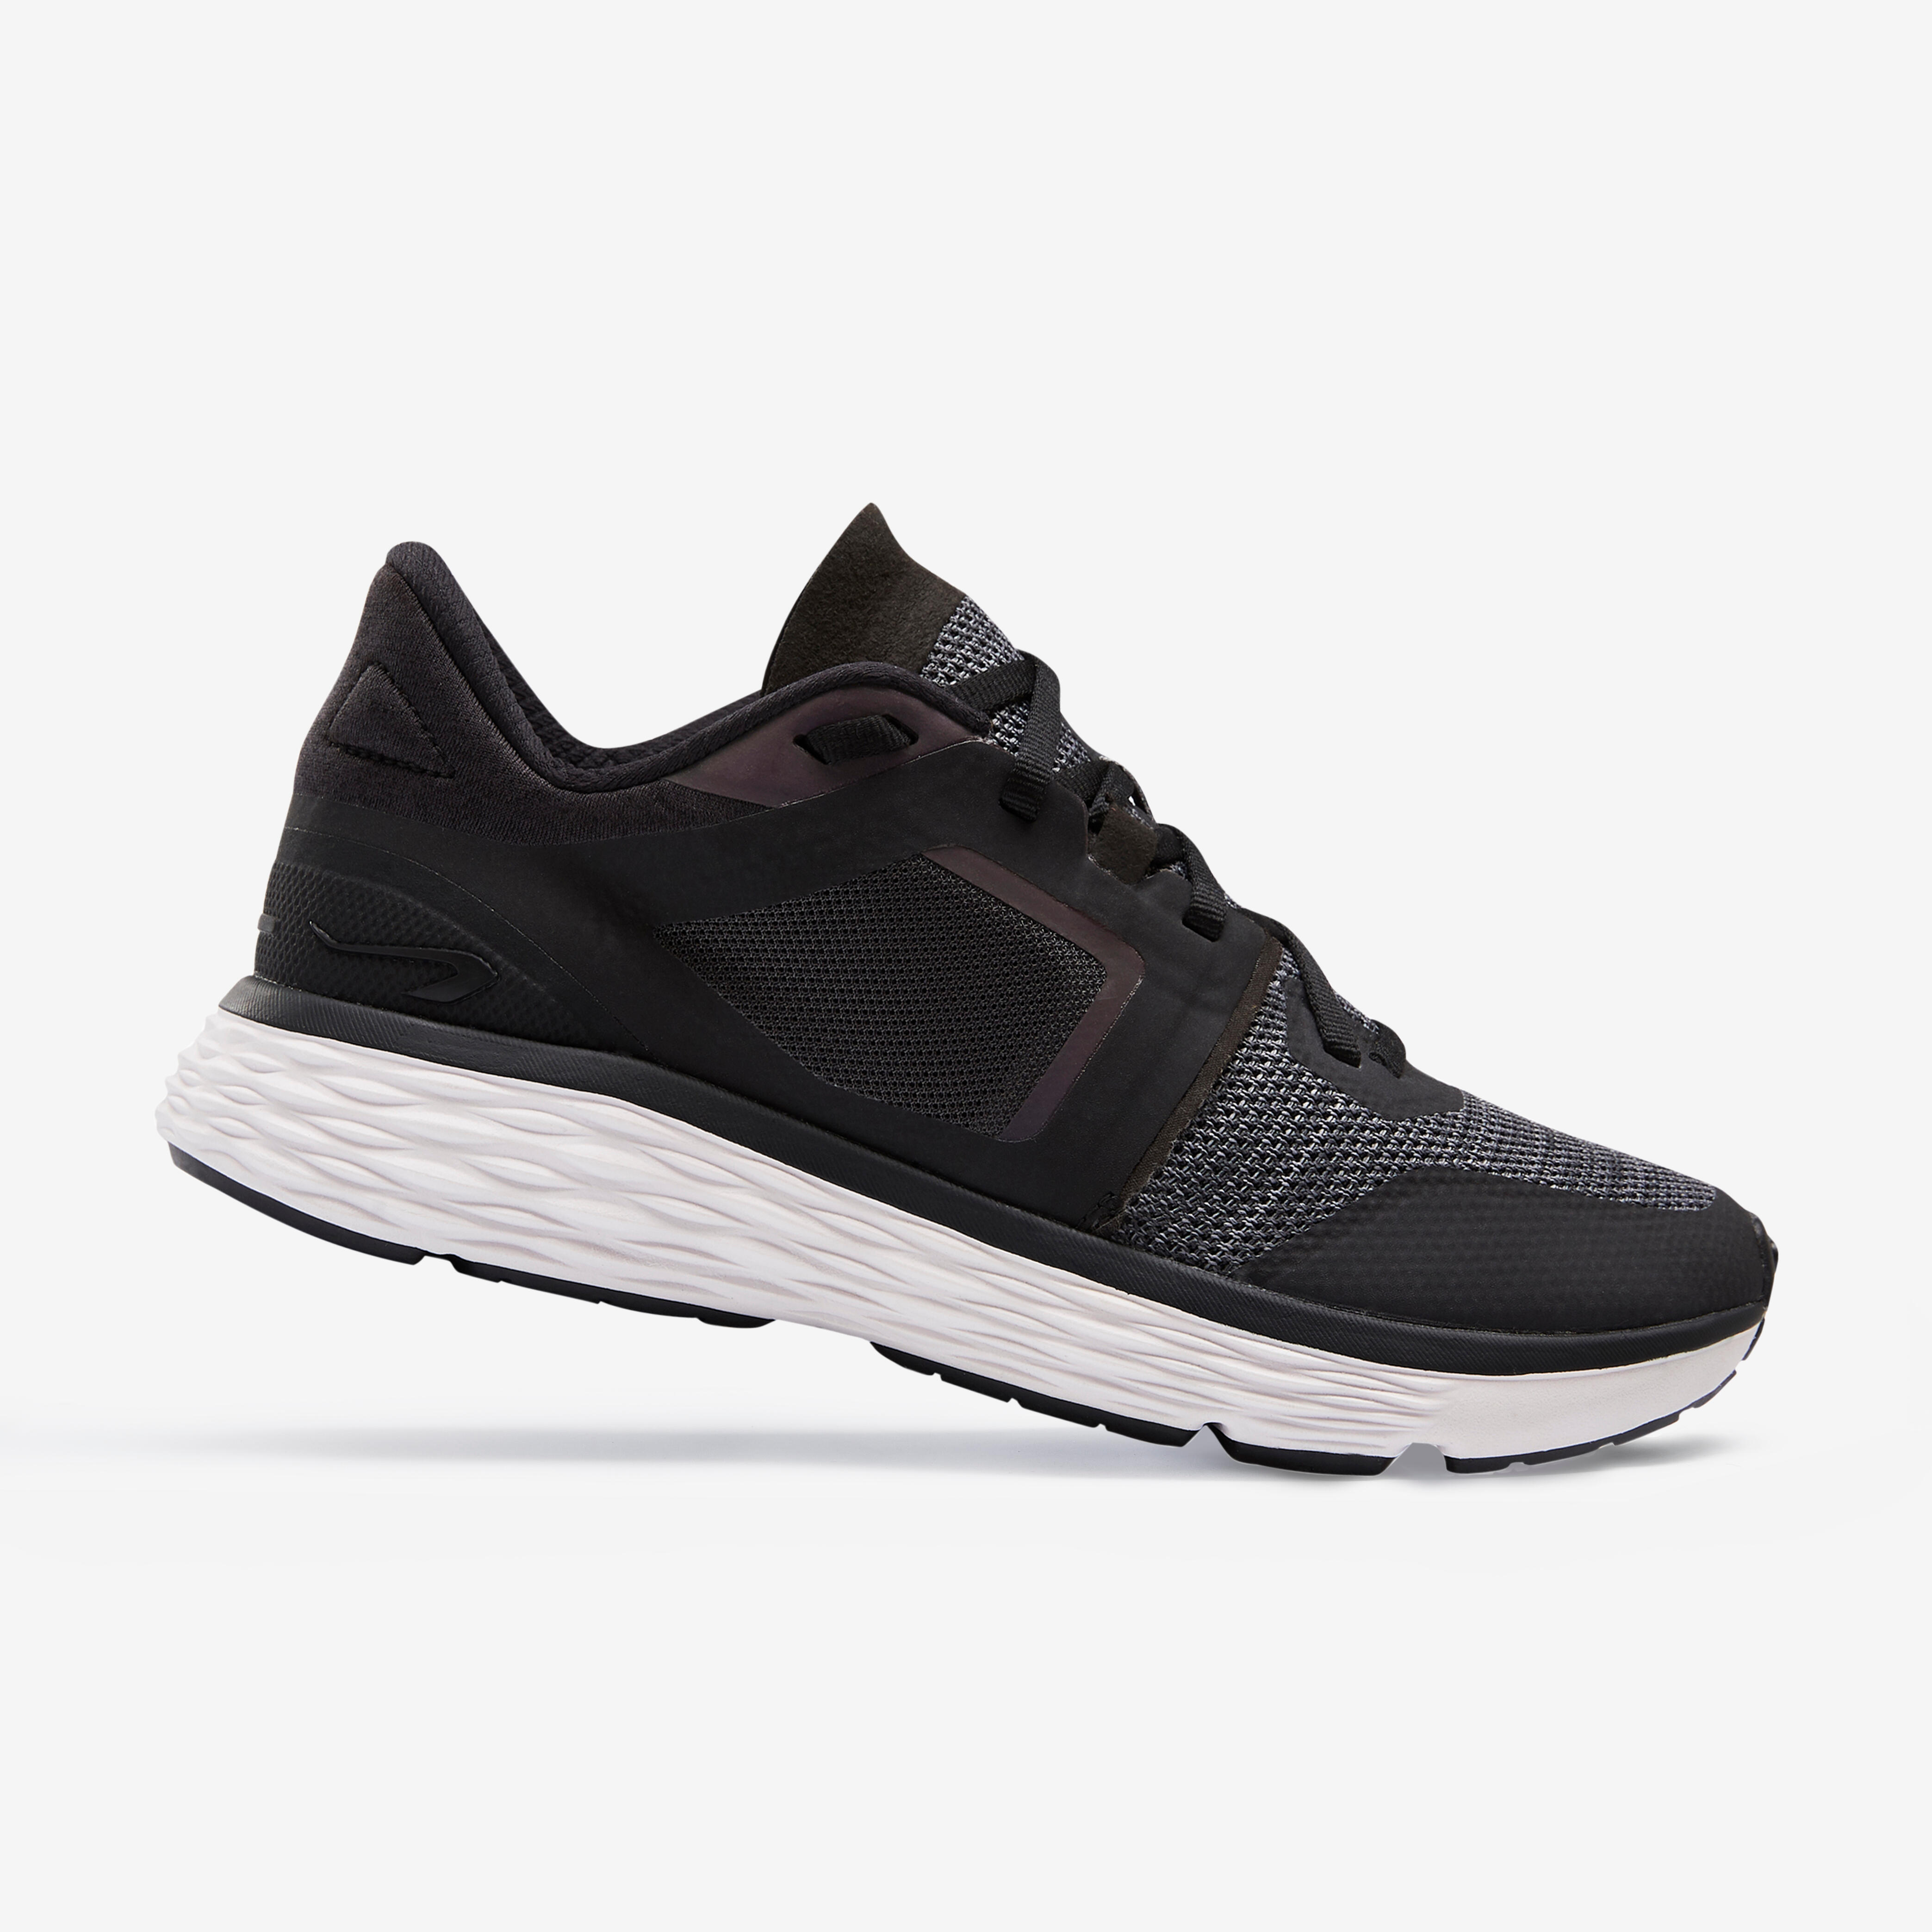 Find your comfort with Kalenji's new shoe - Women's Running